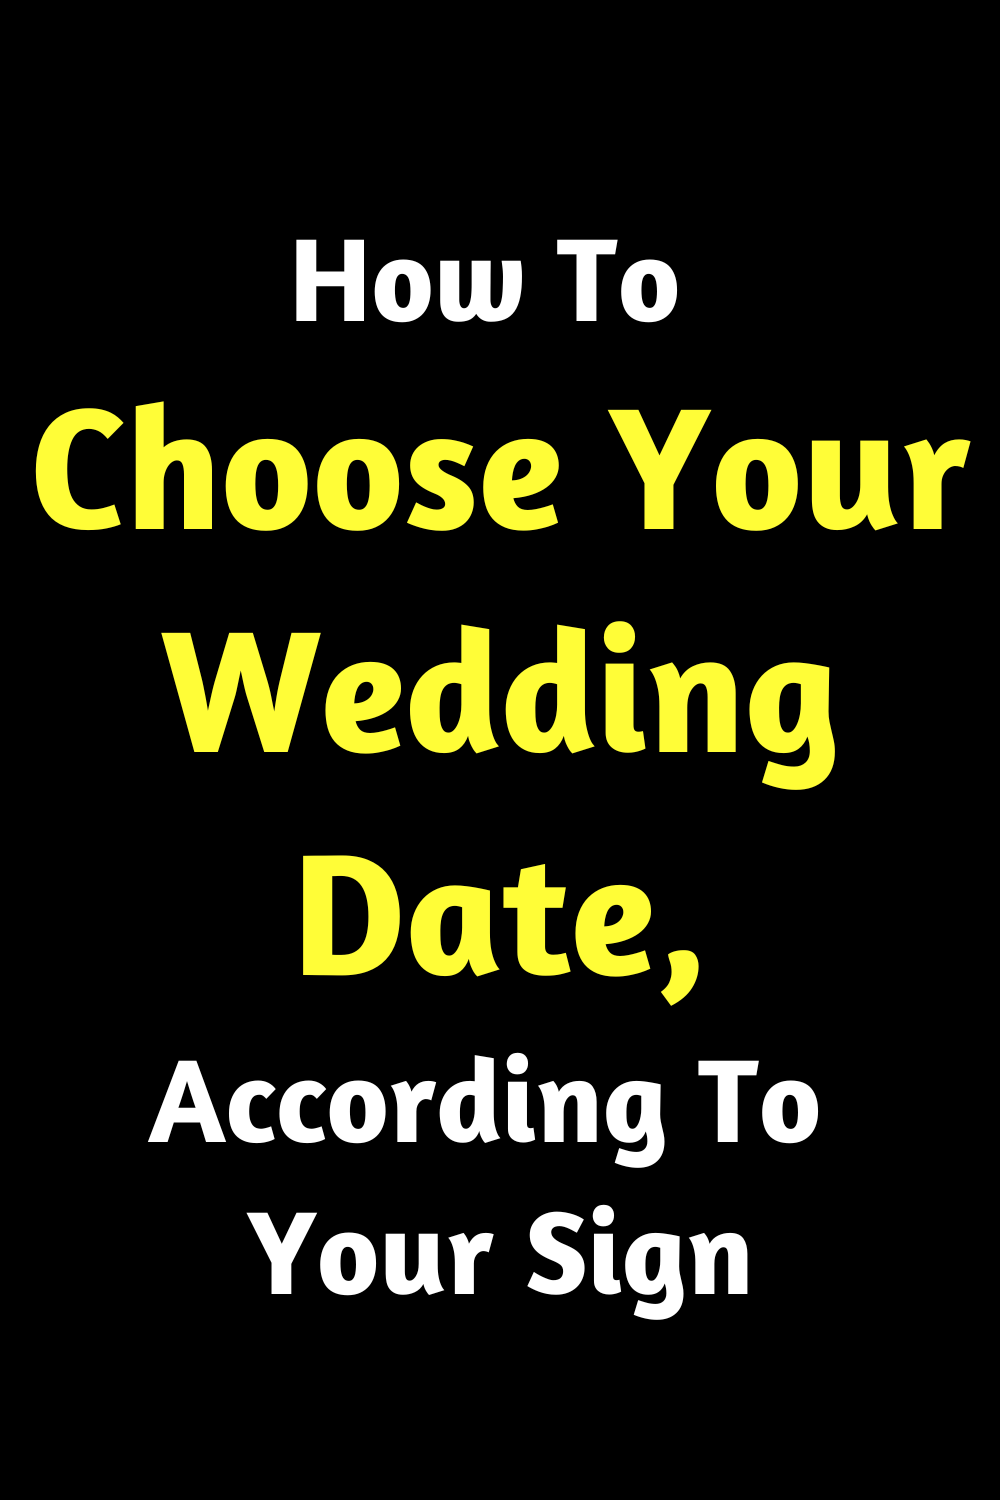 How To Choose Your Wedding Date, According To Your Sign